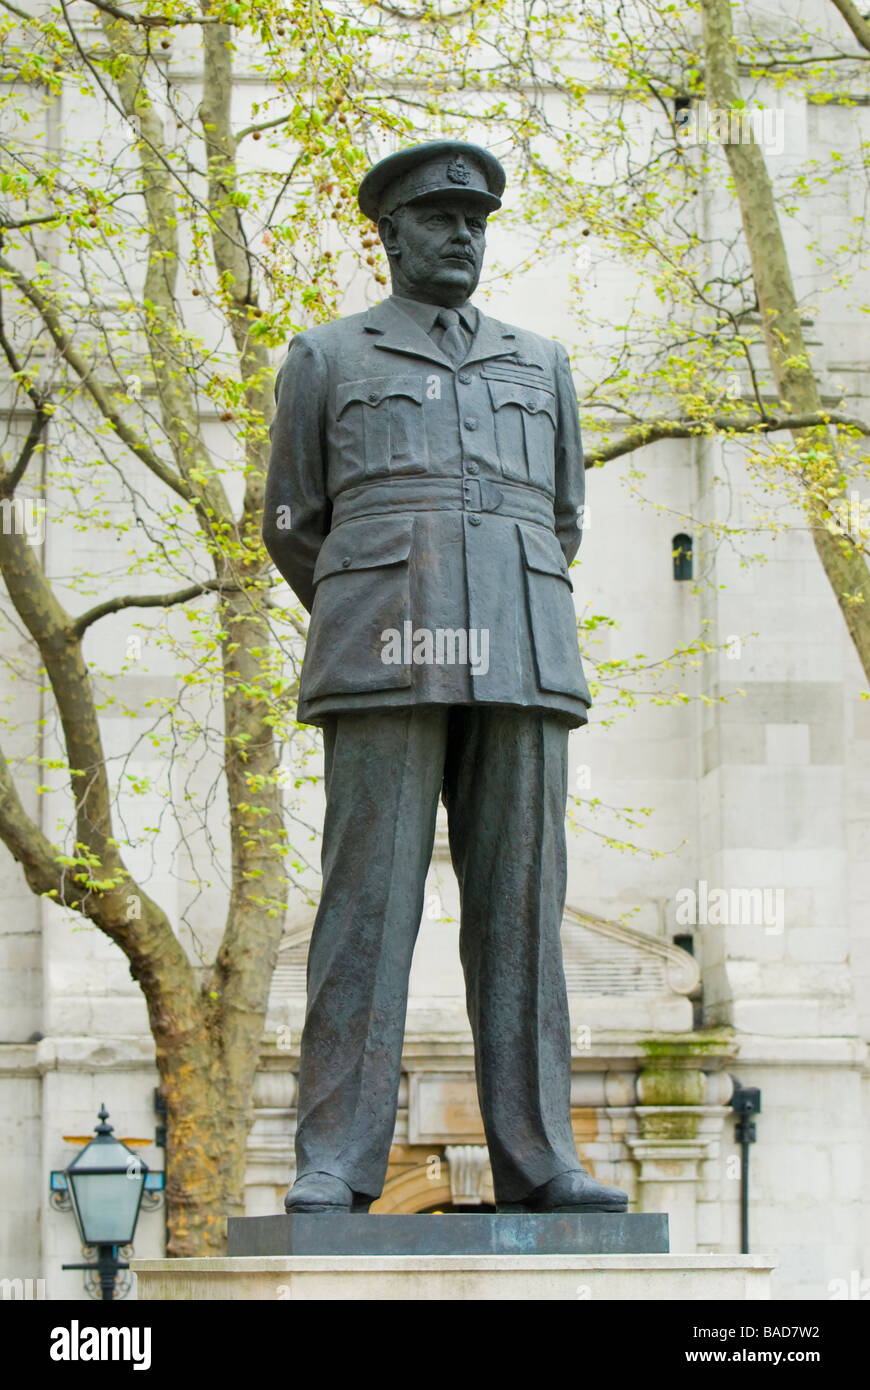 London, England. UK. Statue: Sir Arthur 'Bomber' Harris in front of Church of St Clement Danes, The Strand Stock Photo